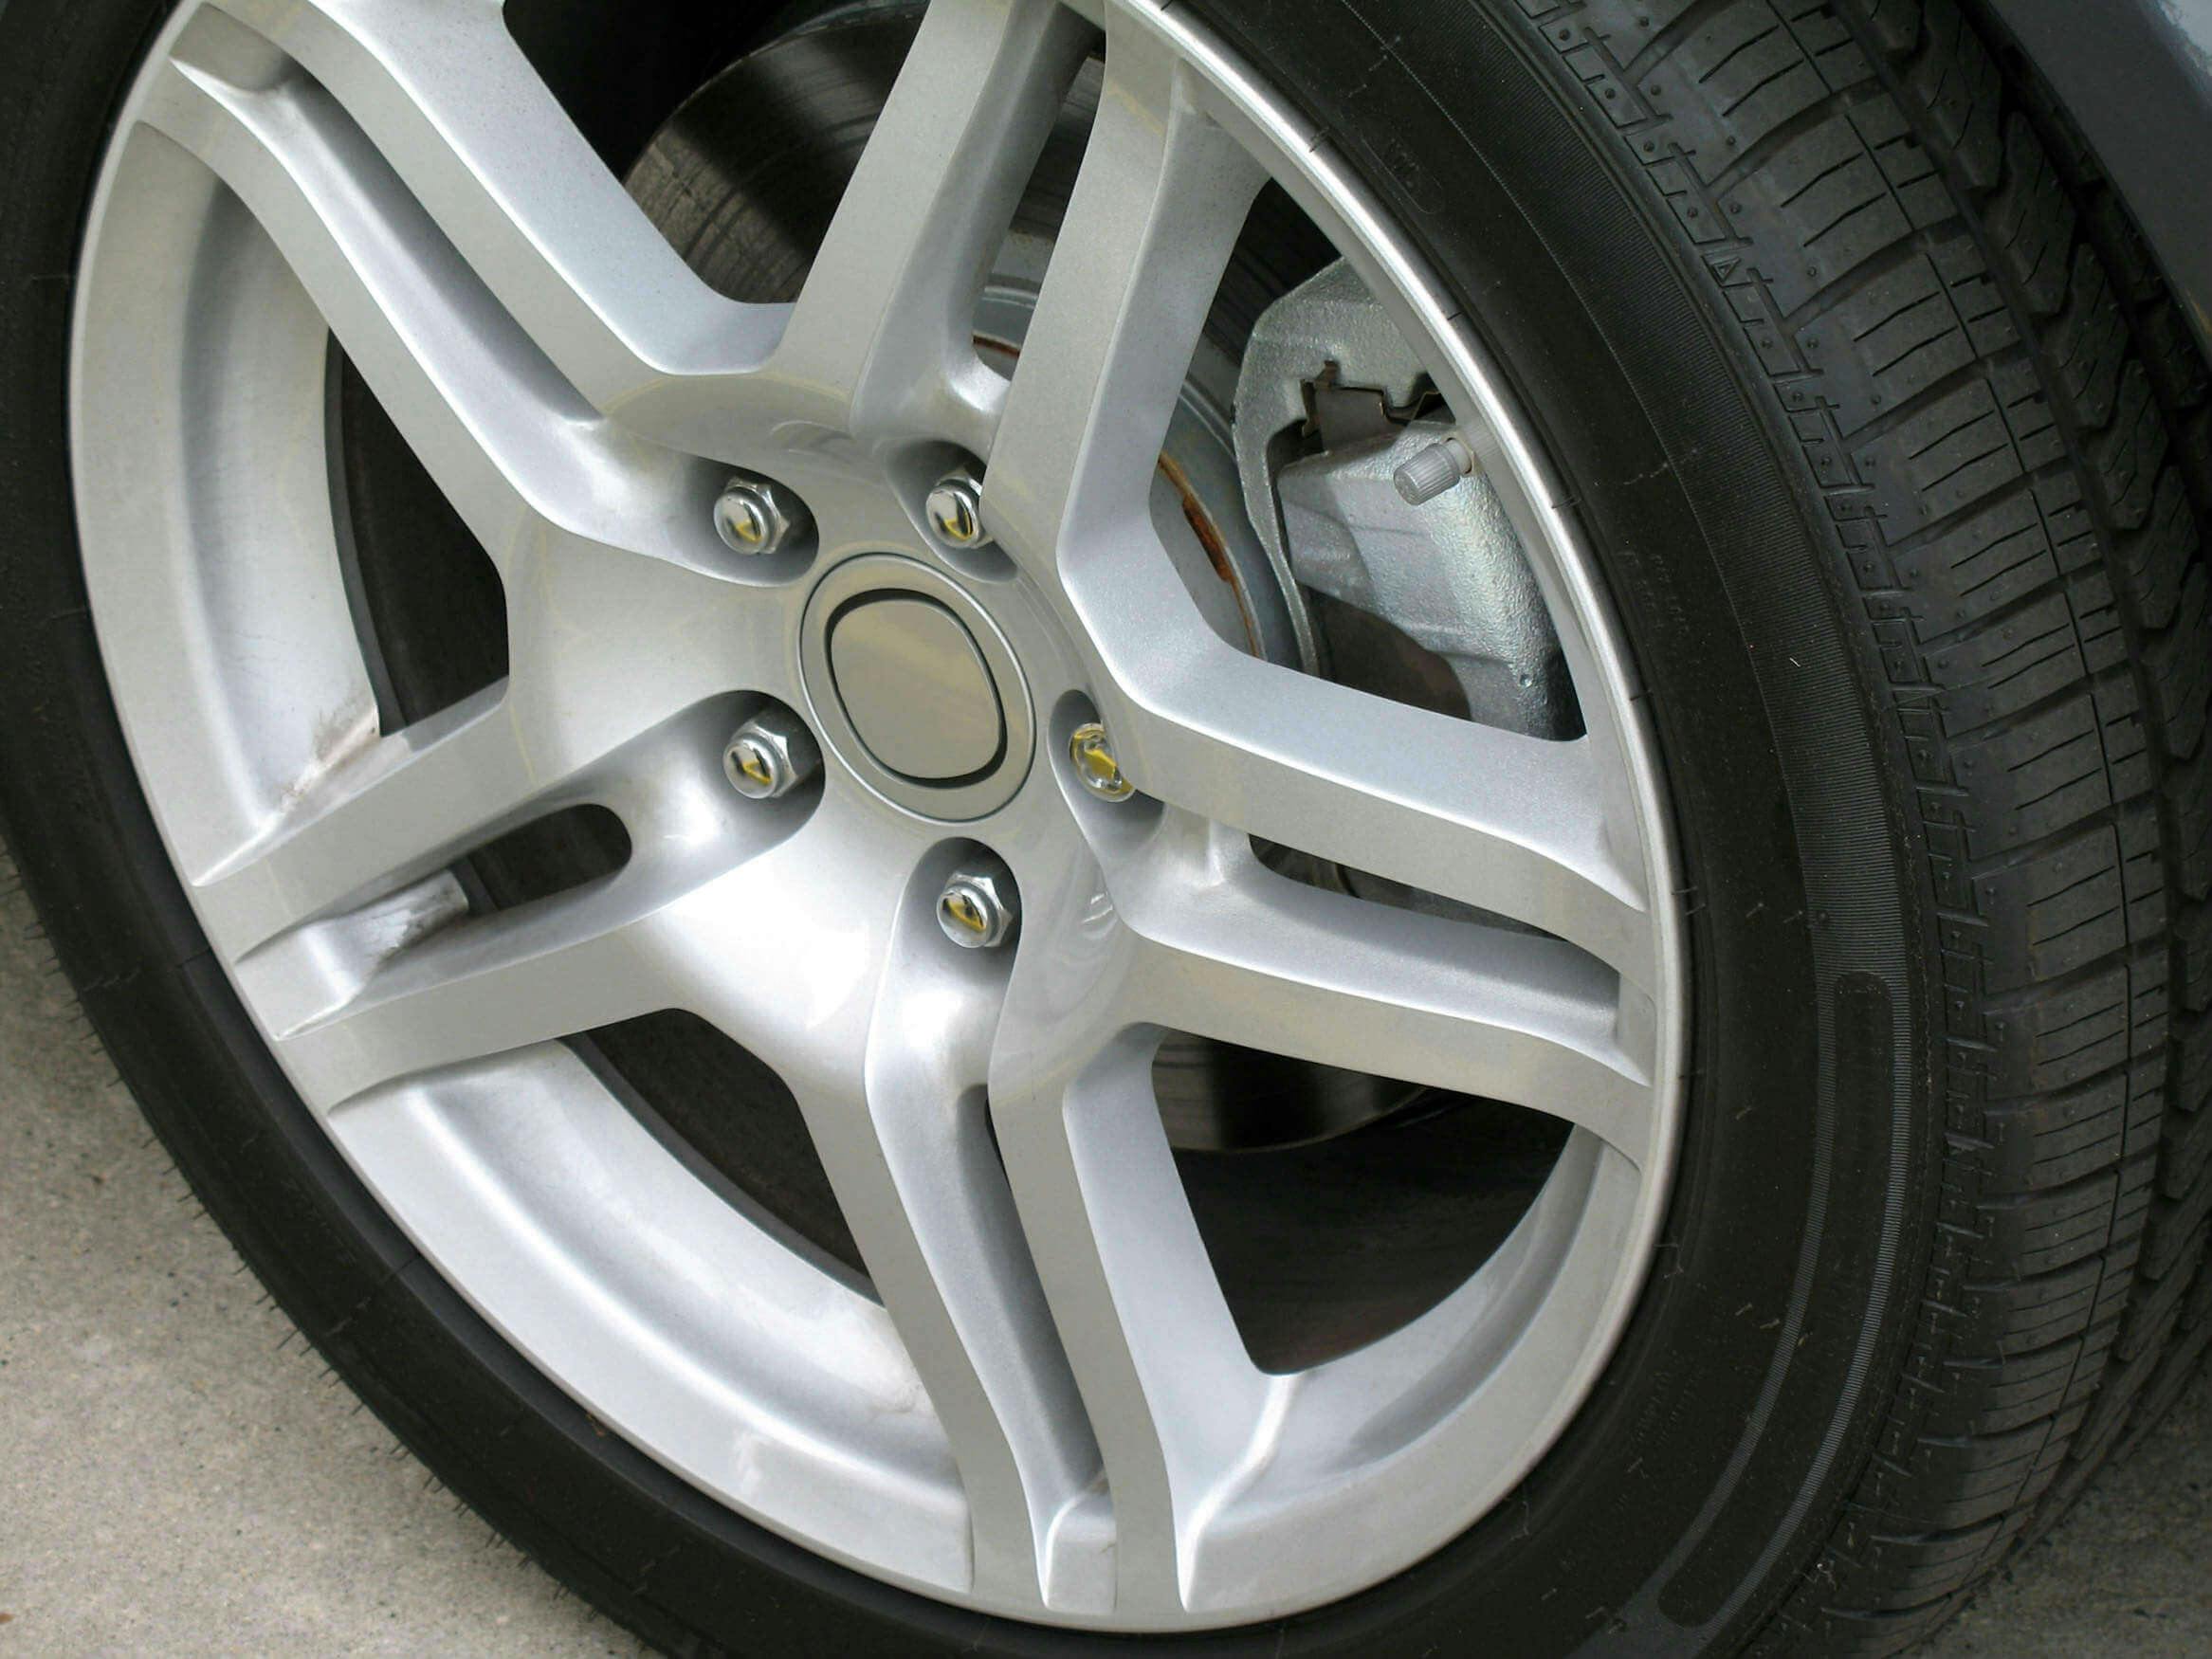 A brand new tyre with a shiny silver alloy wheel.